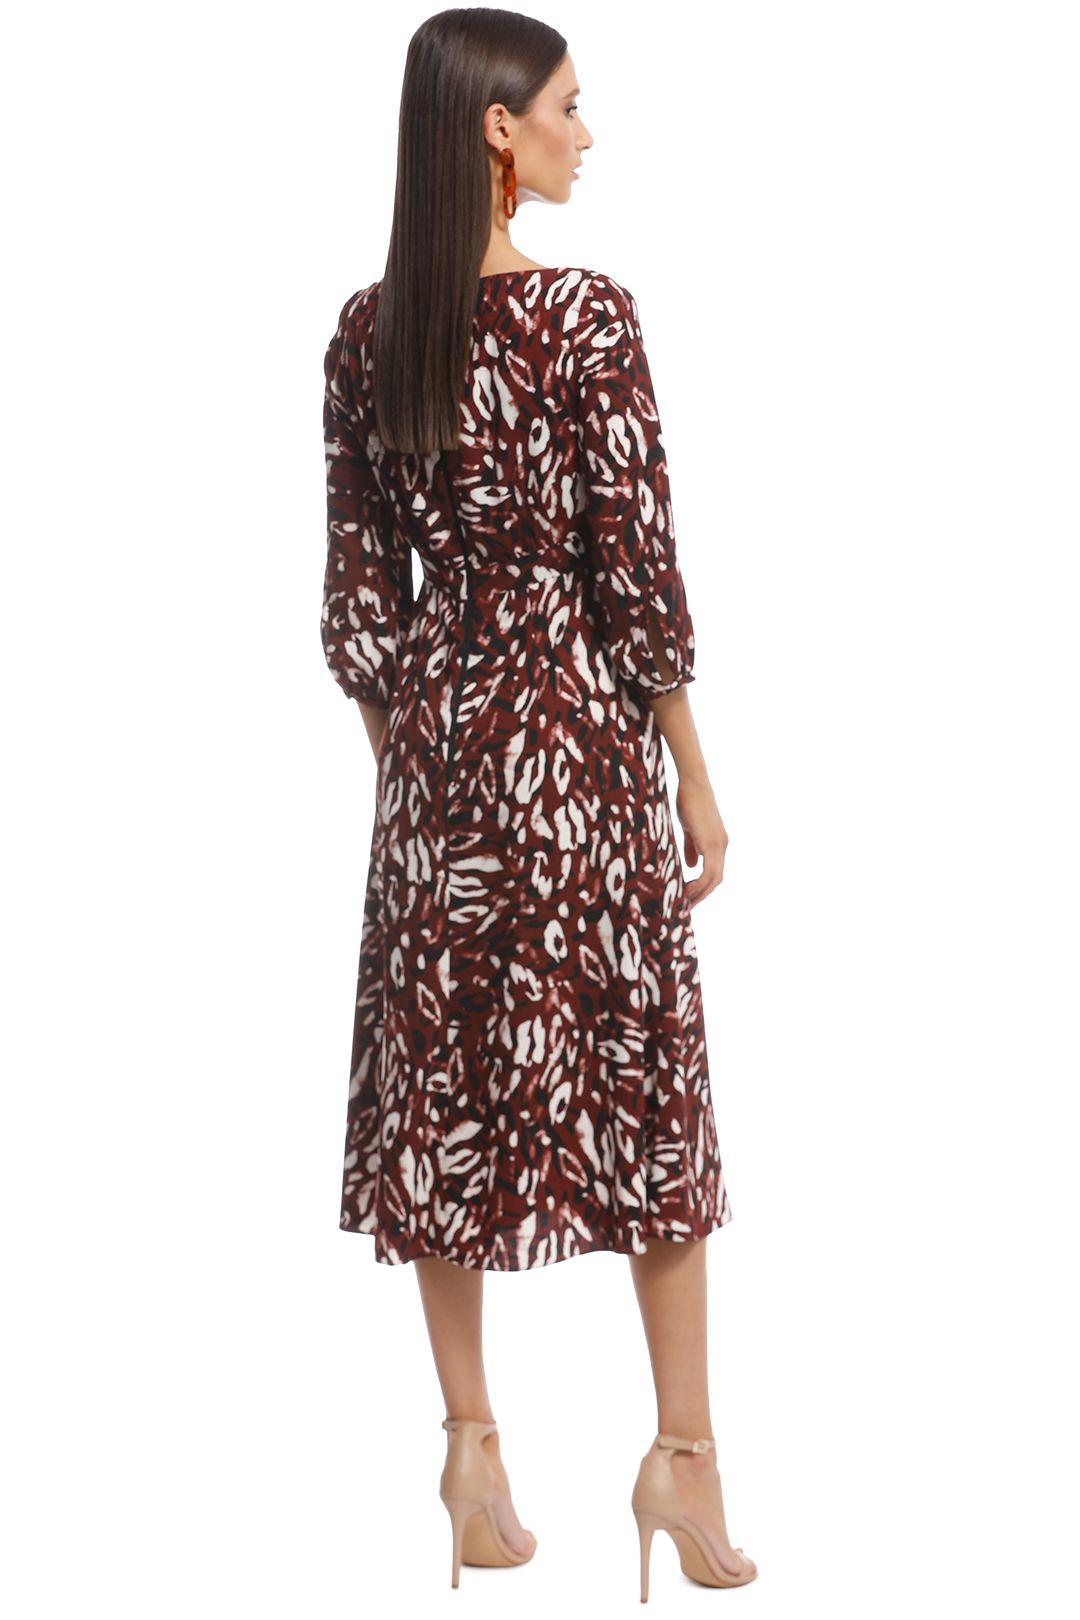 Cue - Abstract Leopard Boat Neck Dress - Burgundy - Back